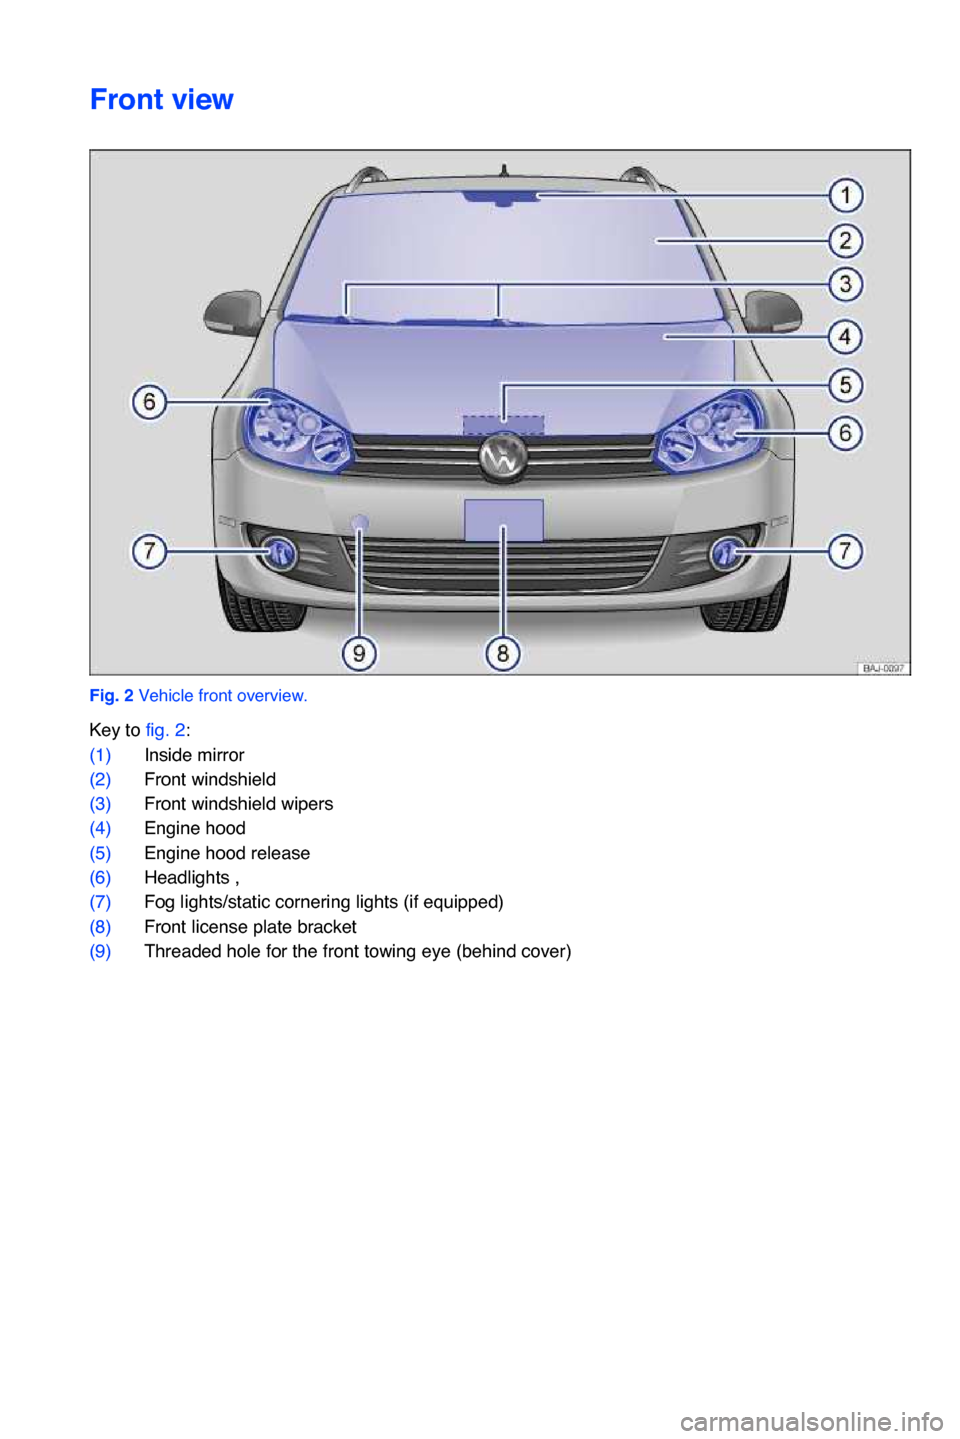 VOLKSWAGEN JETTA SPORTWAGEN 2013 1B / 6.G Owners Manual Front view
Fig. 2 Vehicle front overview.
Key to fig. 2:
(1)Inside mirror 
(2)Front windshield
(3)Front windshield wipers 
(4)Engine hood 
(5)Engine hood release 
(6)Headlights , 
(7)Fog lights/static